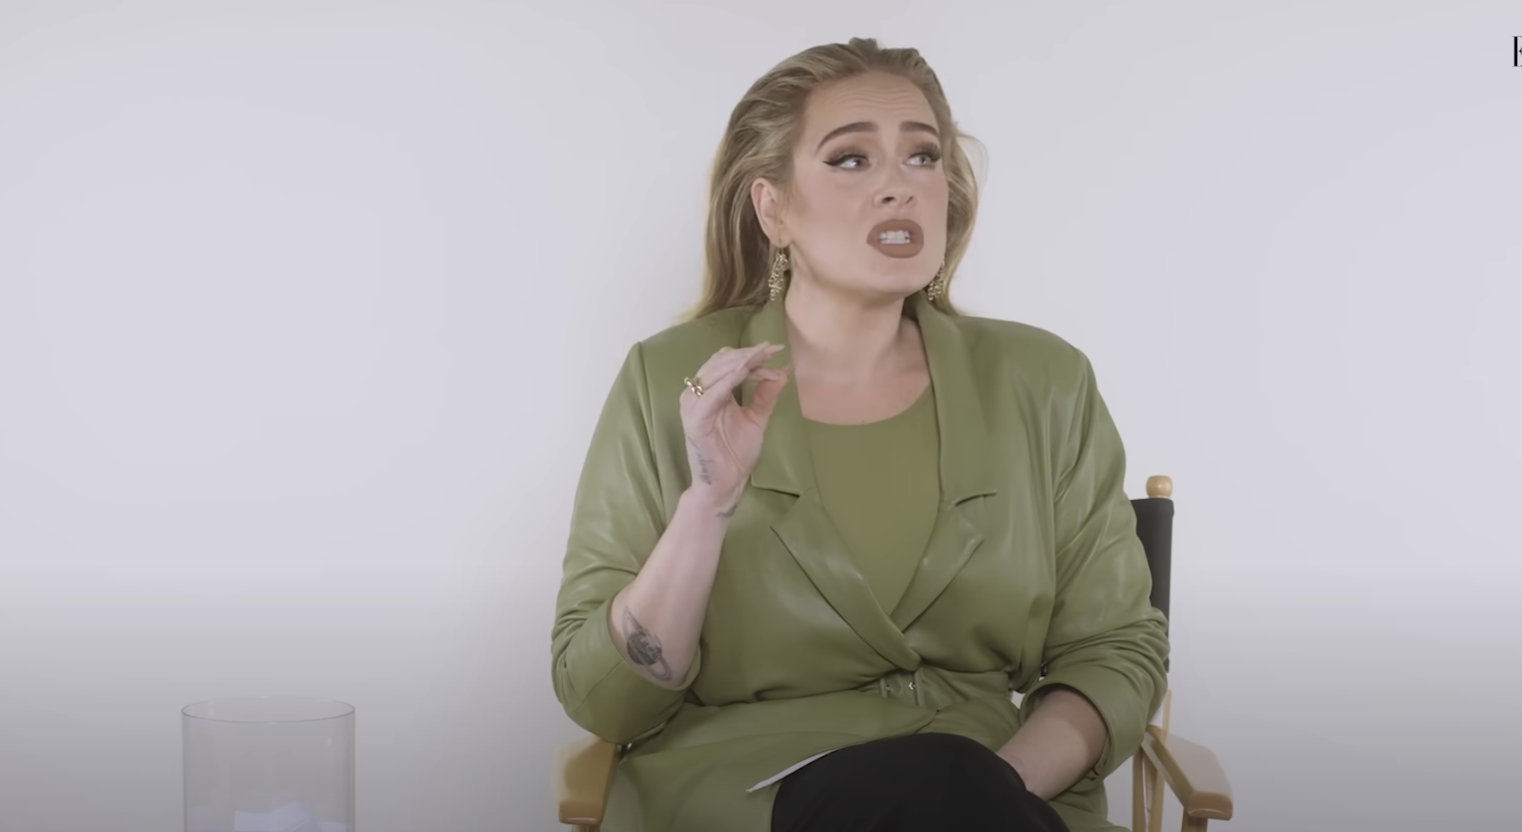 Adele in an interview